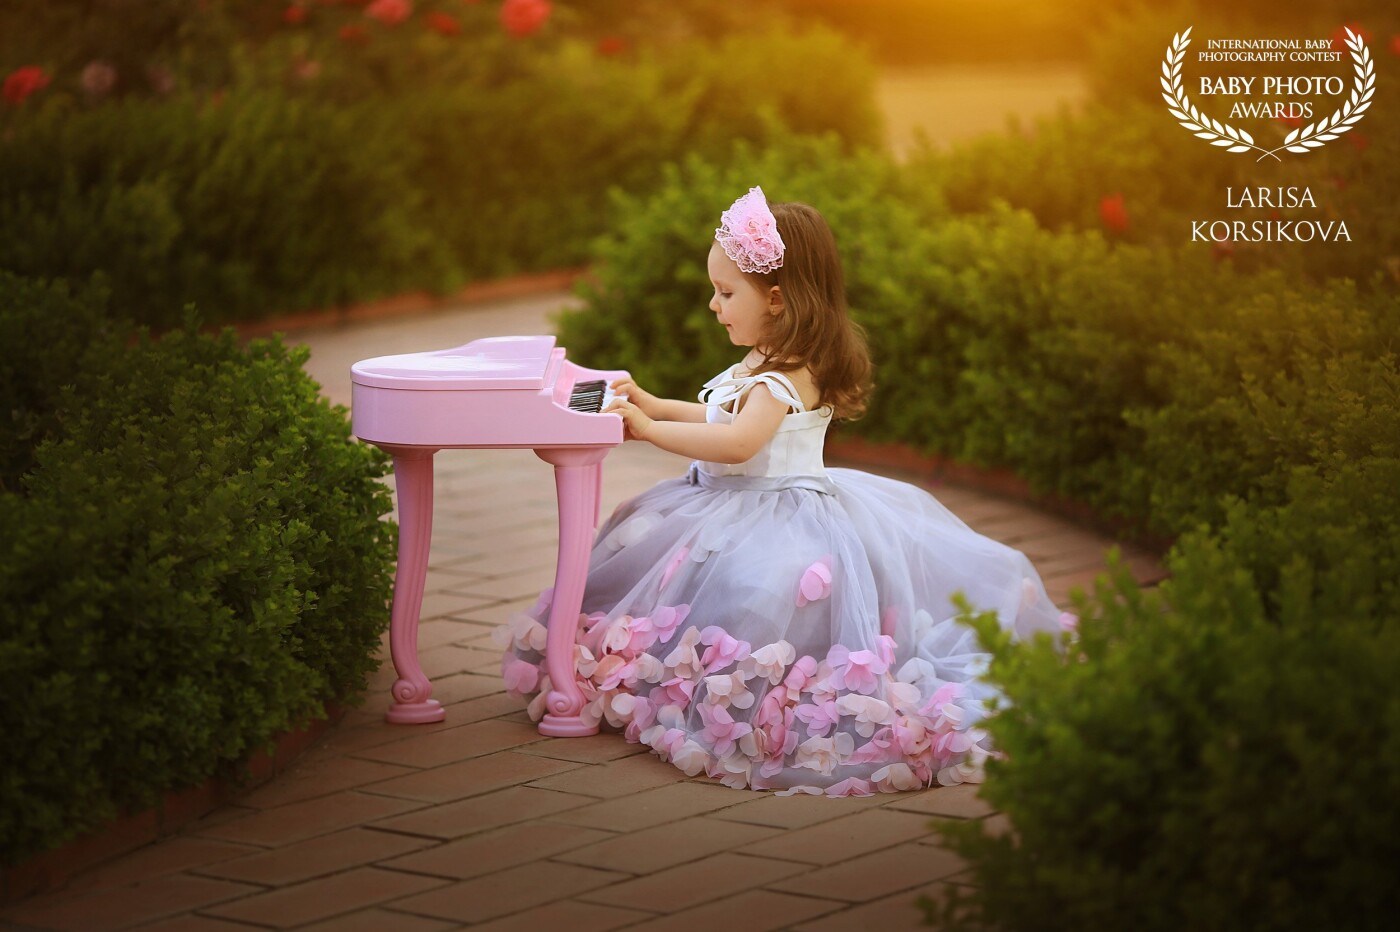 My little starlet adores music. She likes to play her tiny piano, dance, and sing. She always gives me new ideas for the photo-sessions. 